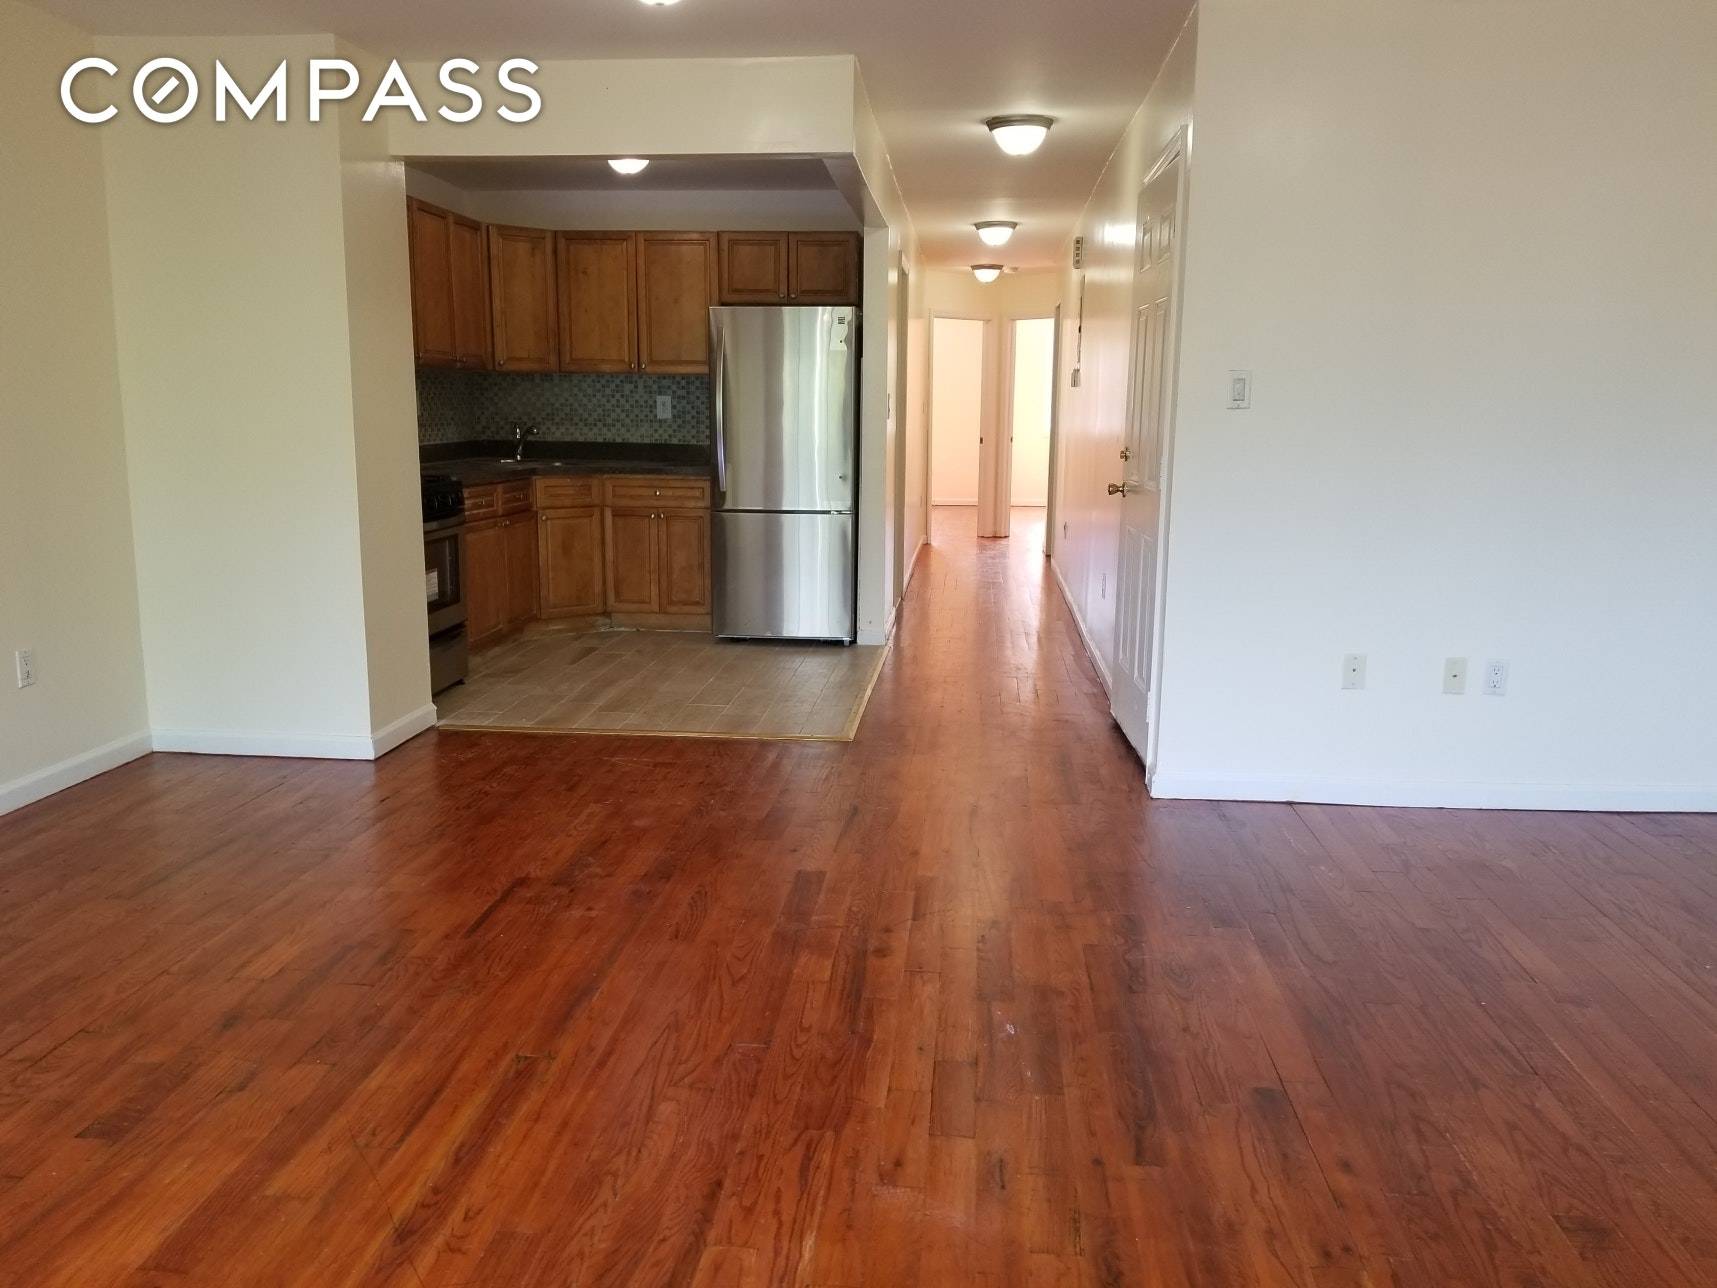 Spacious floor through 3 bedrooms with 2 full bathrooms apartment located at the top floor of a small town house.